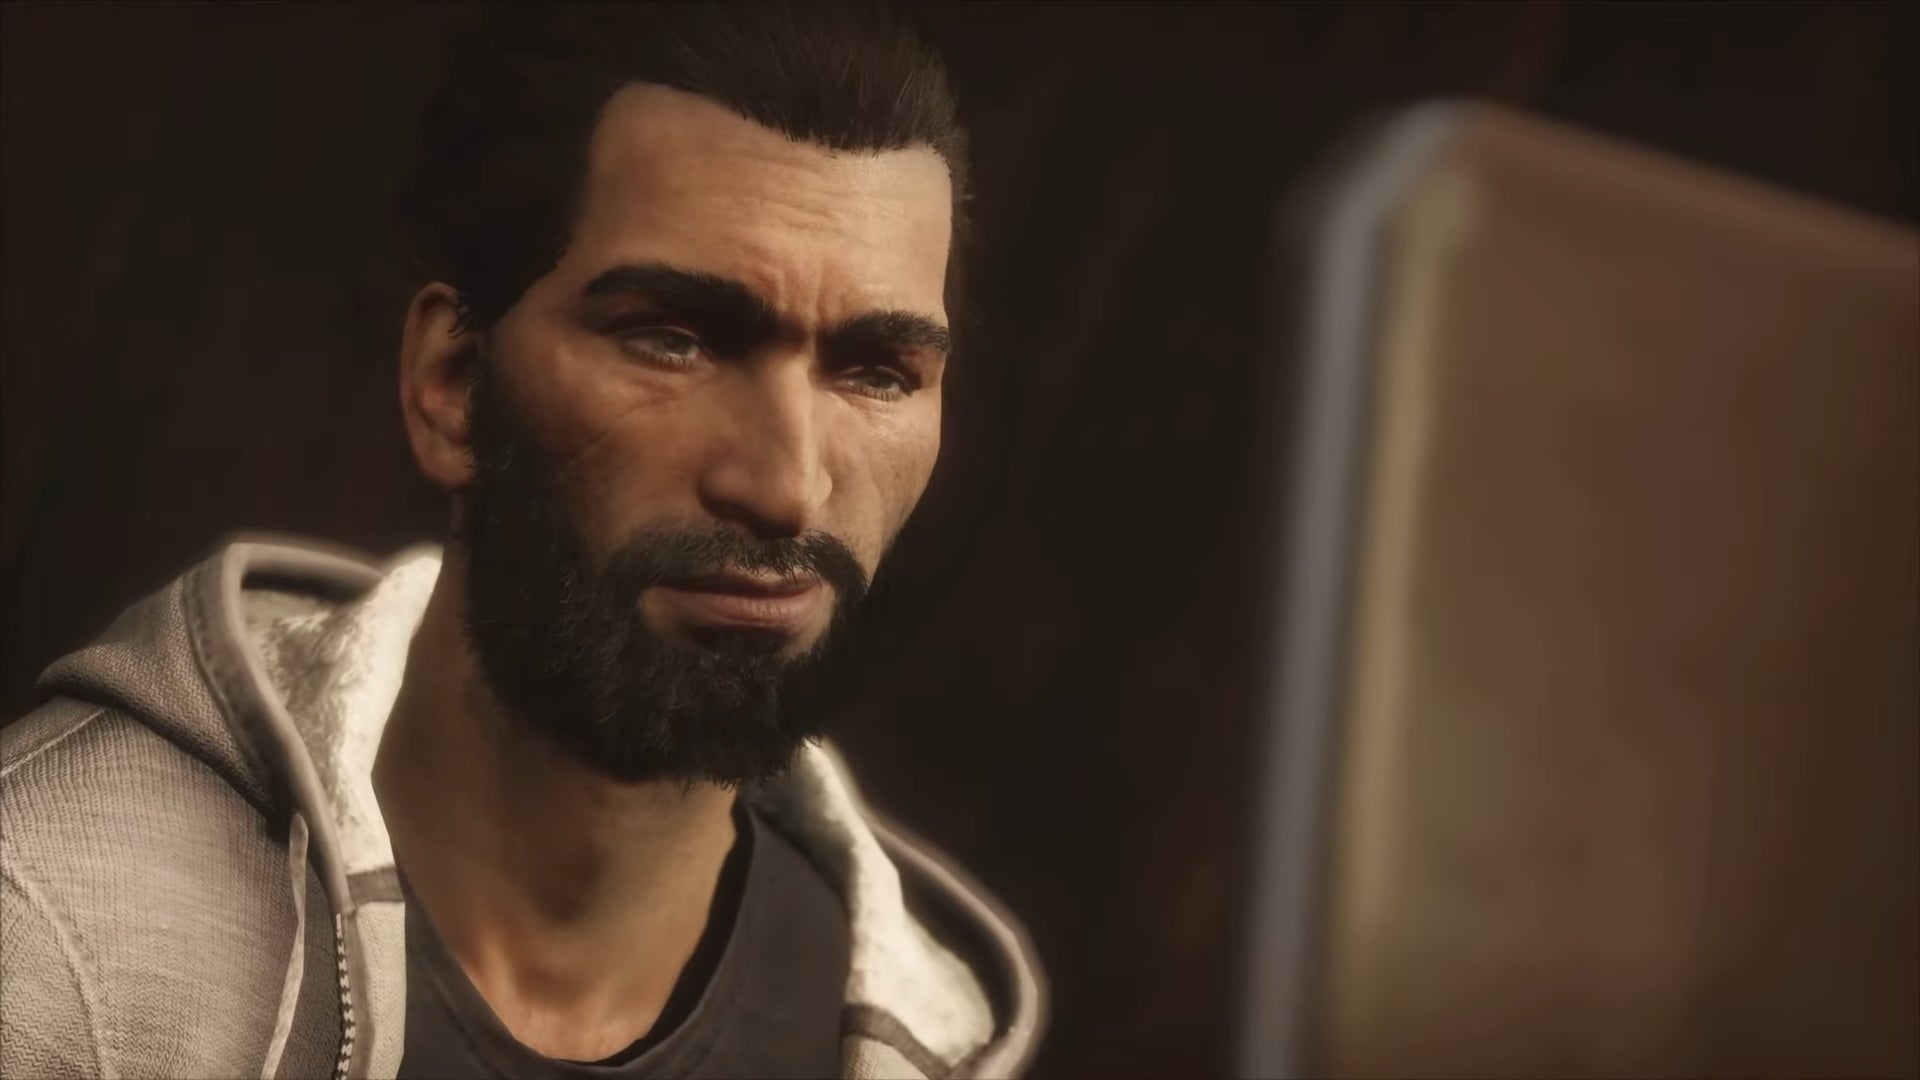 A close-up of Basim, a character in the modern day storyline of Assassin's Creed Valhalla, staring at a laptop screen.